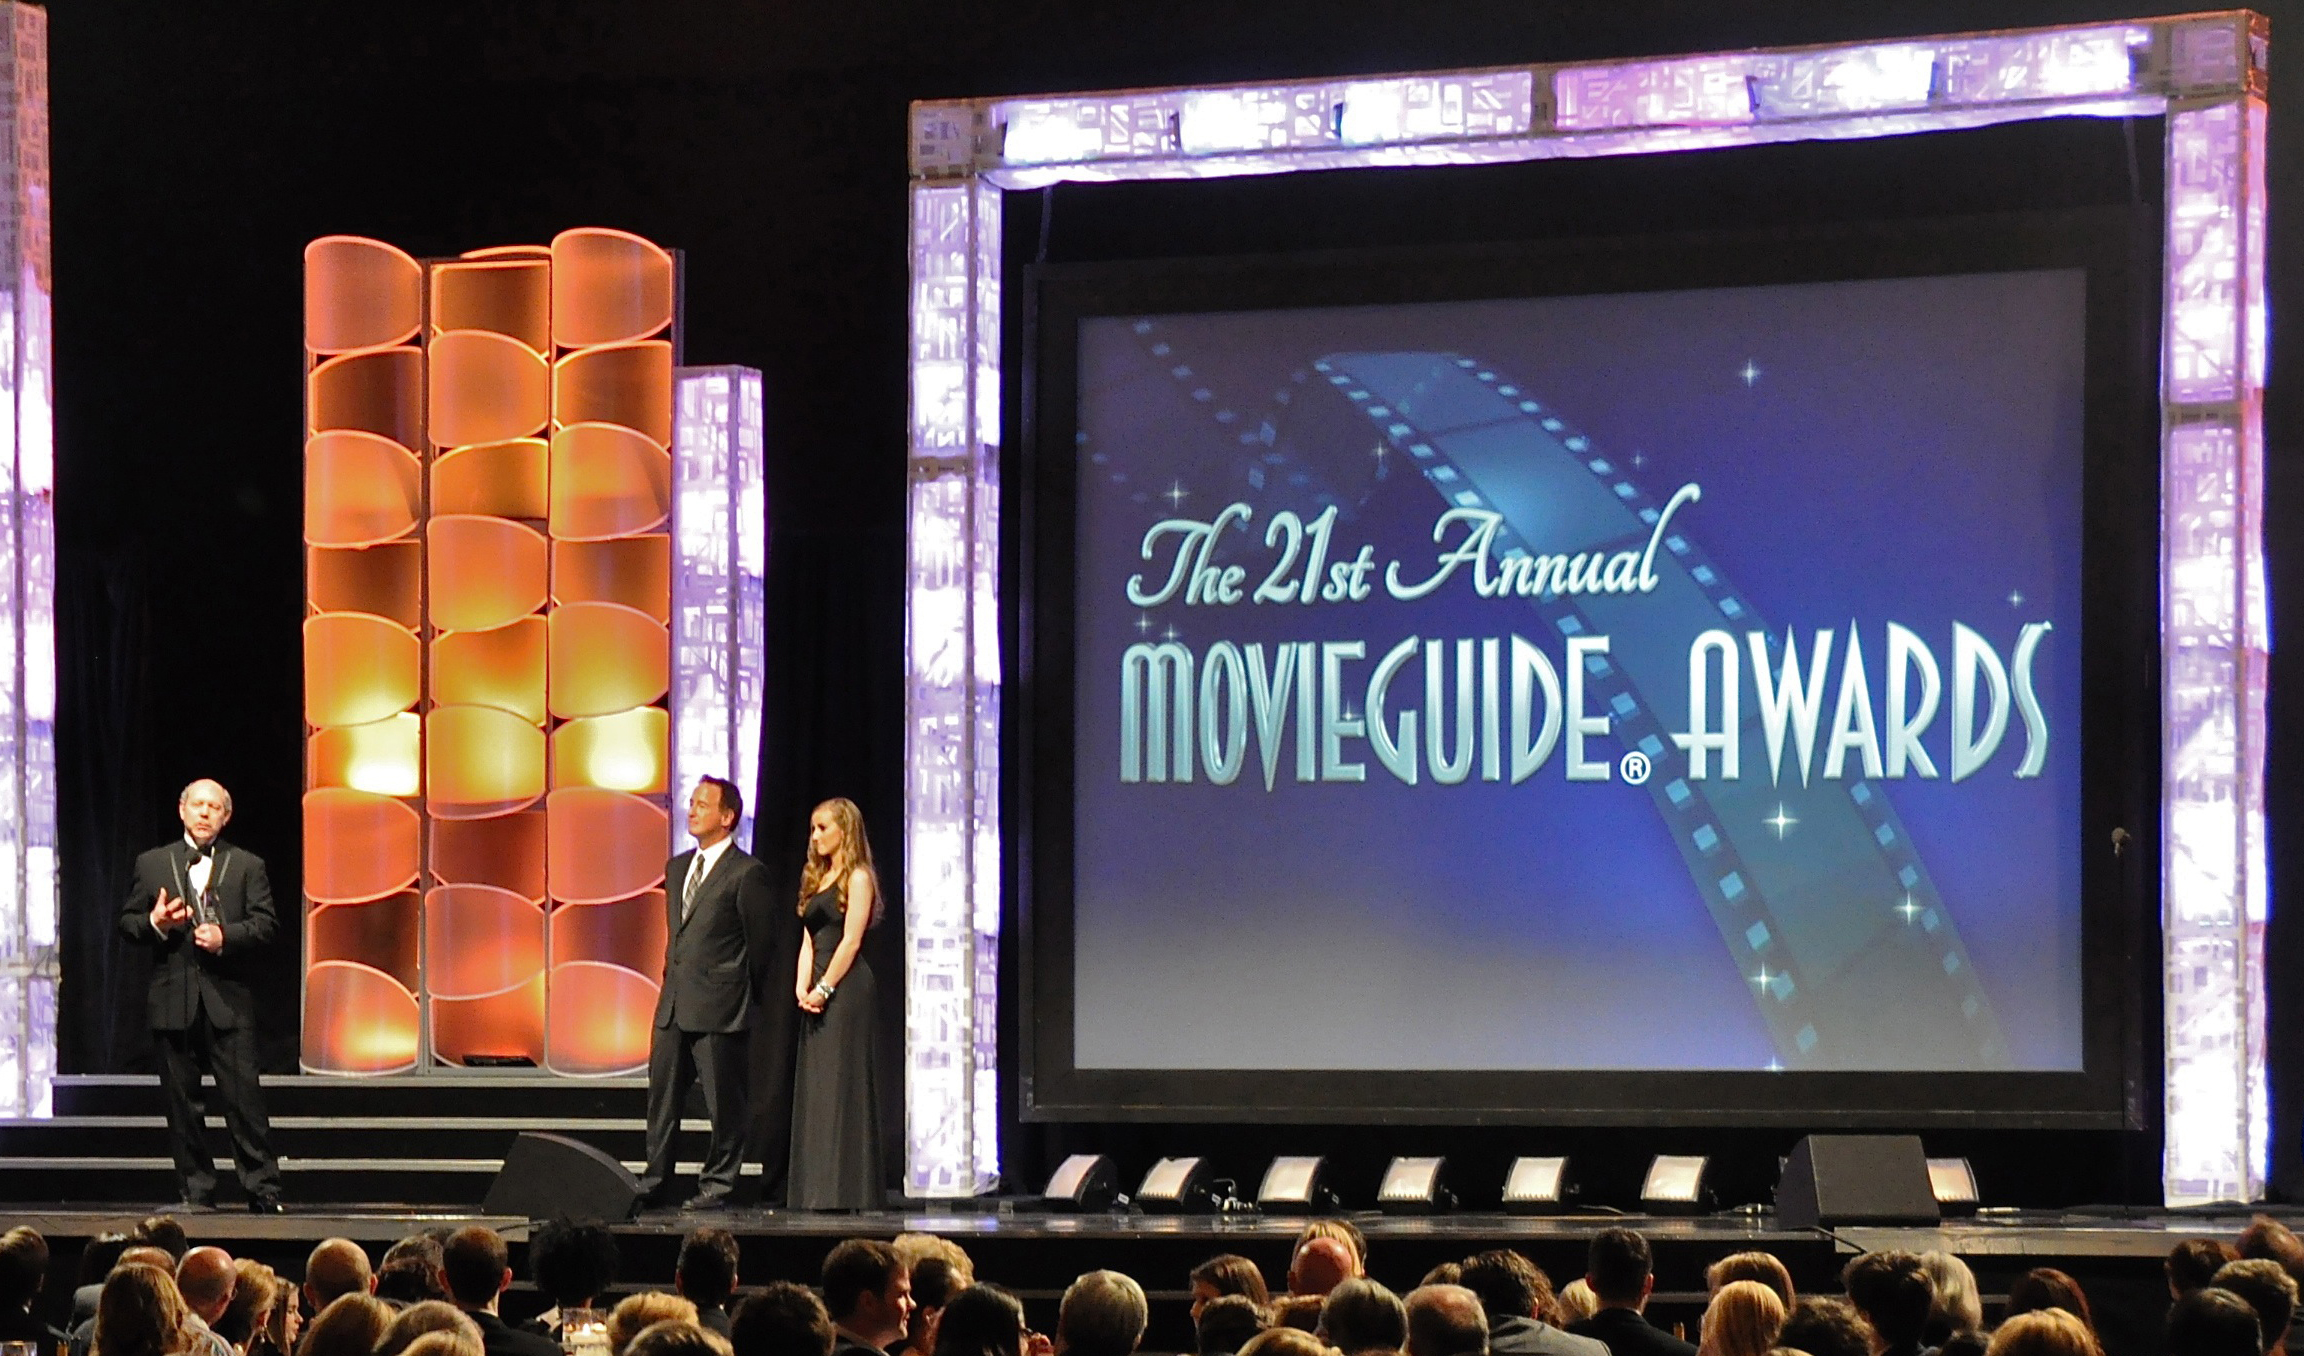 James M. De Vince accepting an award at the MovieGuide Awards in Hollywood.